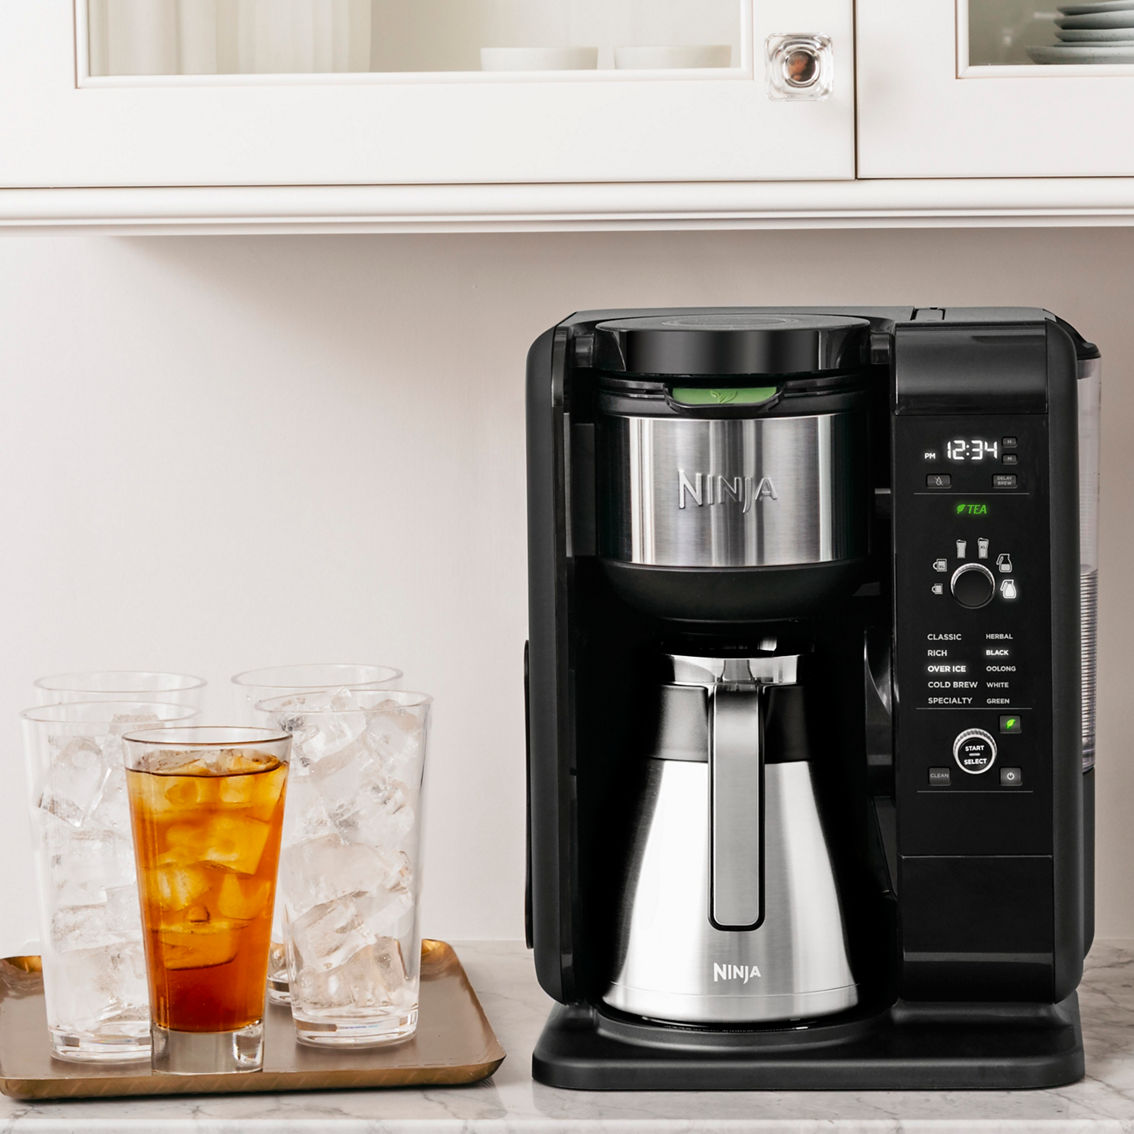 Ninja CP307 Hot and Cold Brewed System with Thermal Carafe - Image 4 of 8